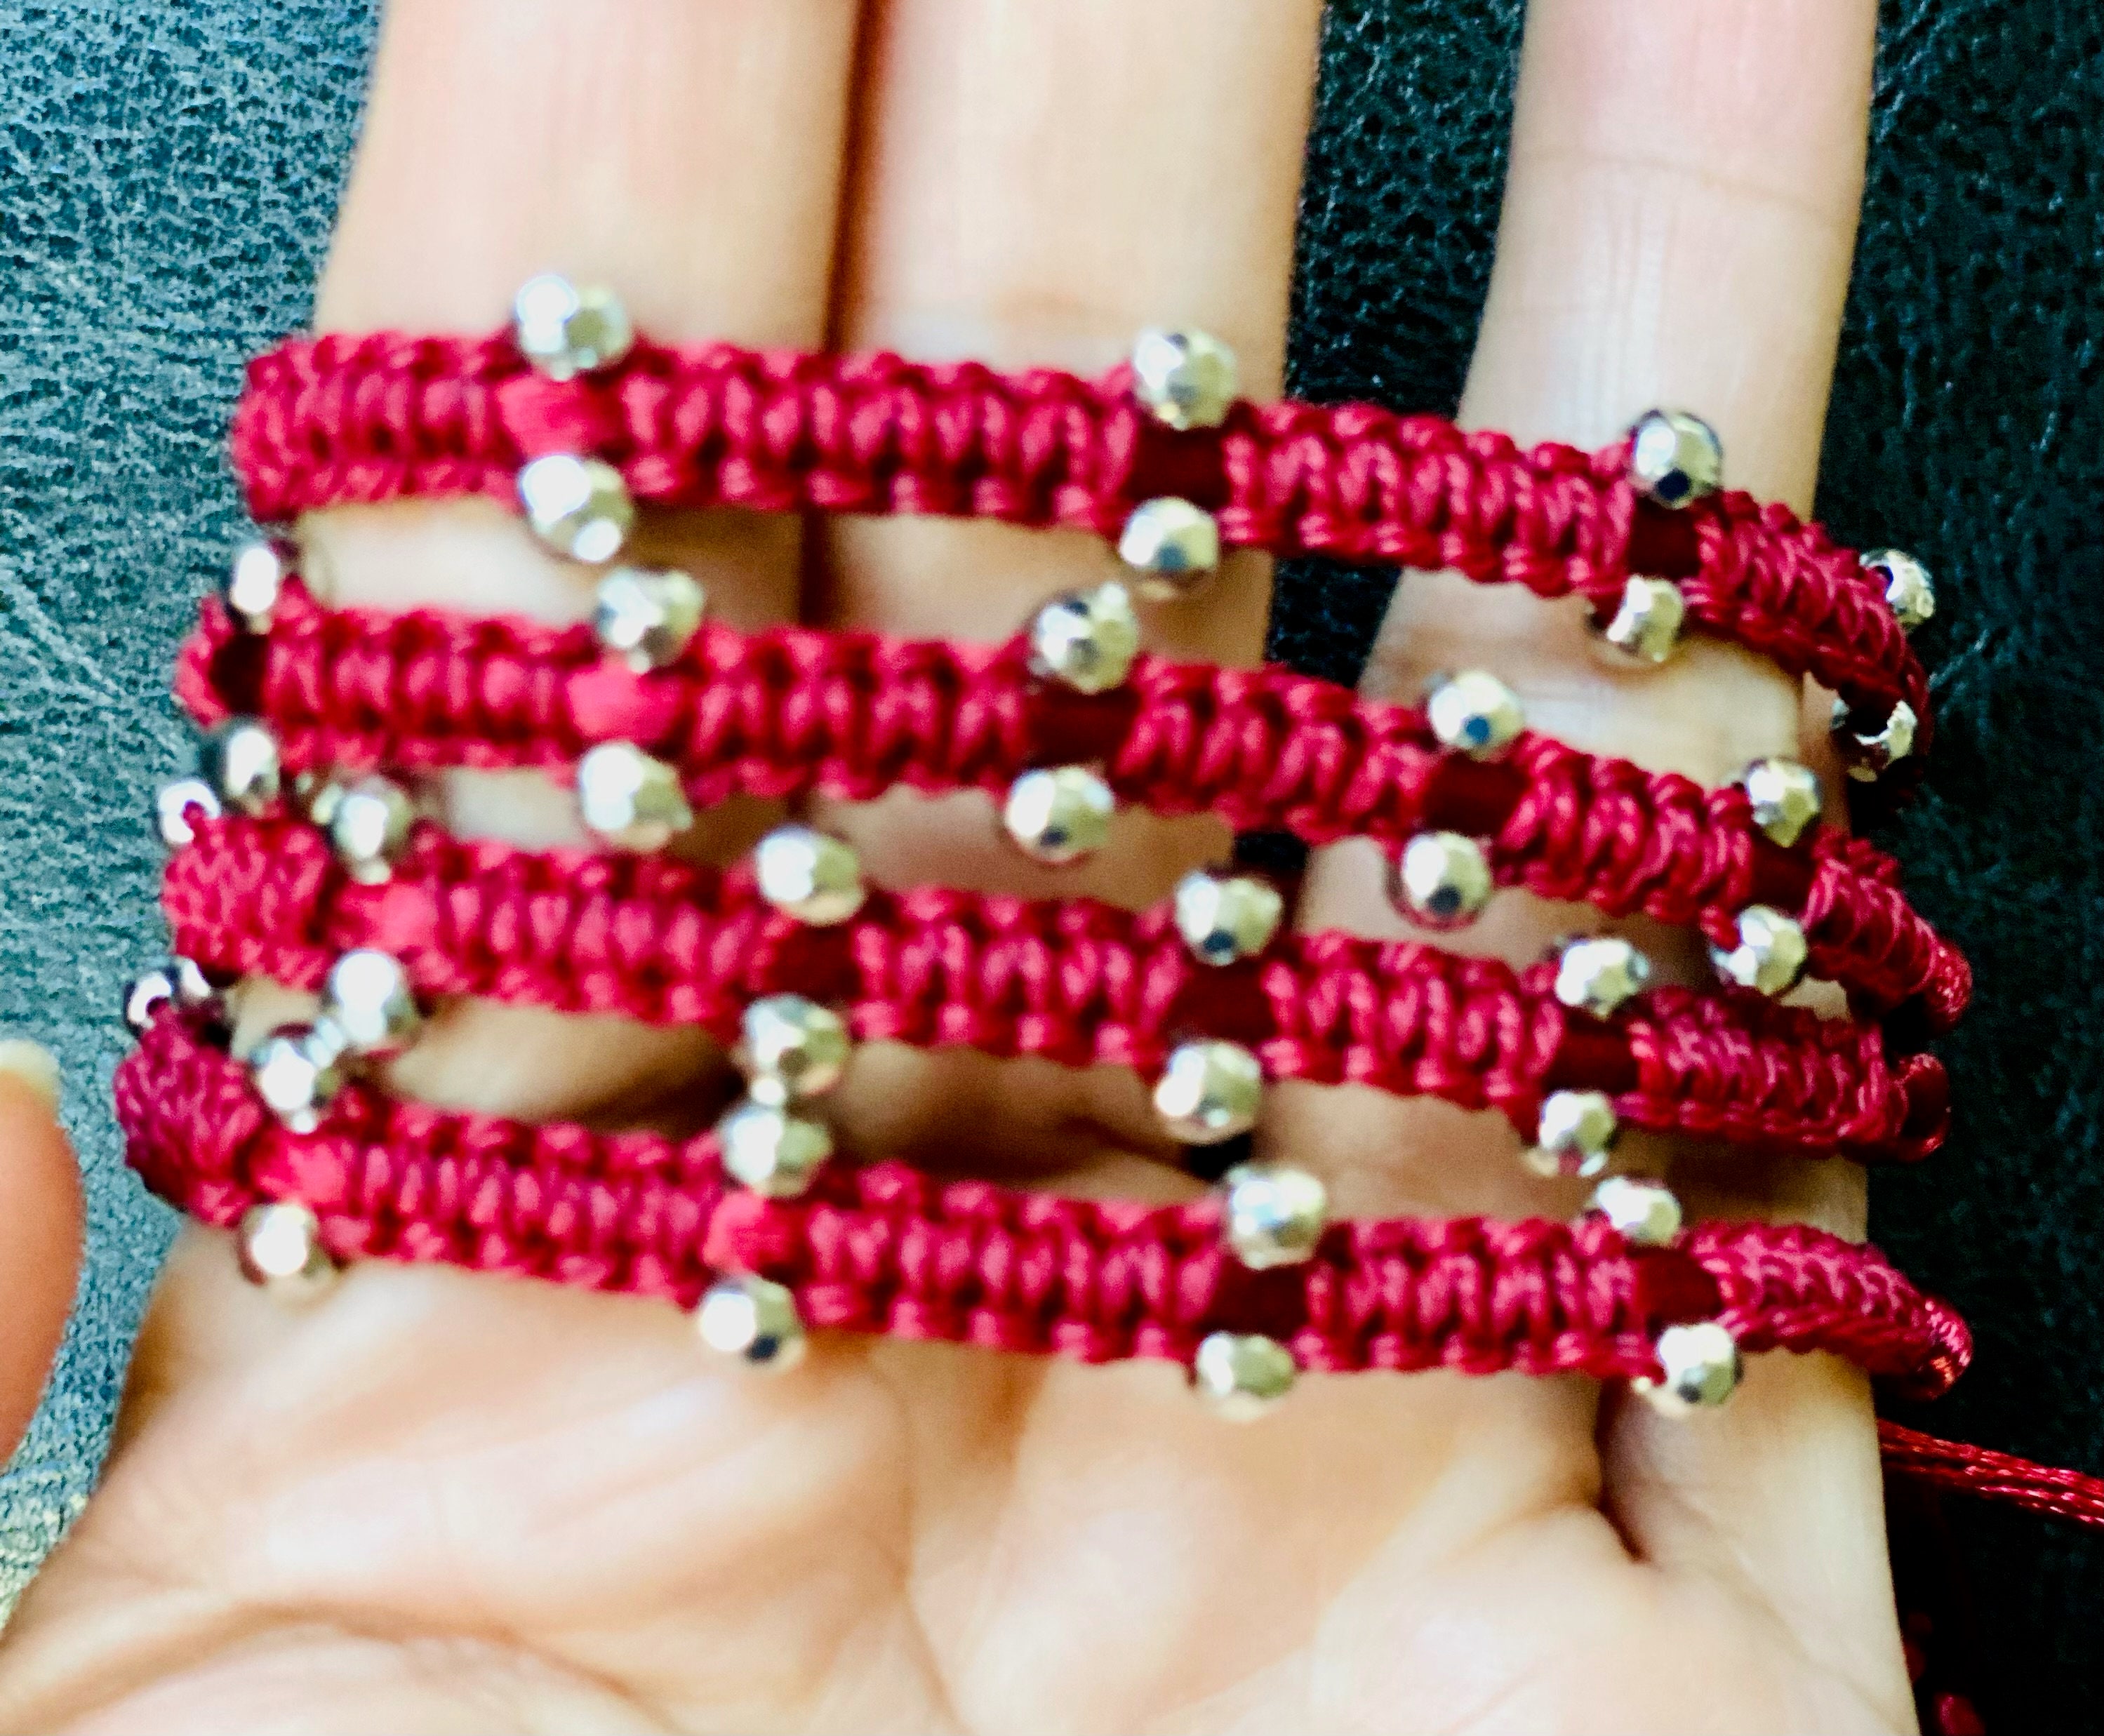 Thread Bracelet in Burgundy Color With Rice Beads. 